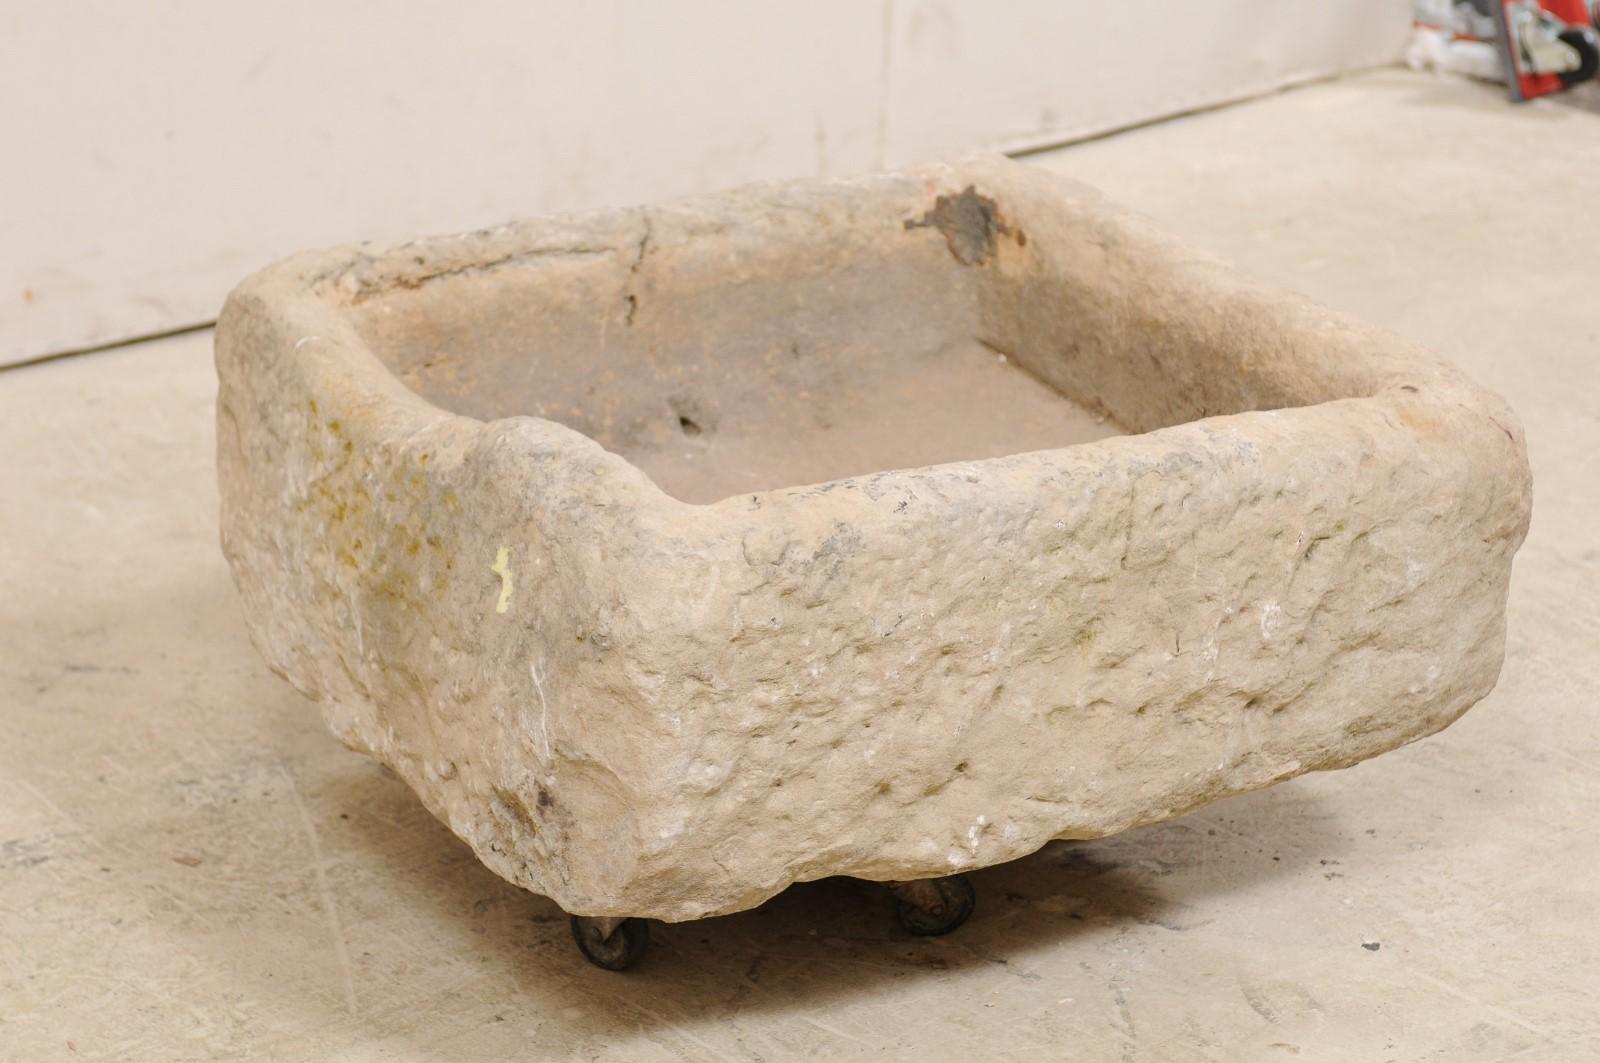 A Spanish square-shaped carved stone basin from the 19th century, potentially older. This antique trough from Spain, has a mostly squared shape which has been hand carved out of a single piece of stone. The basin has a nicely textured surface and